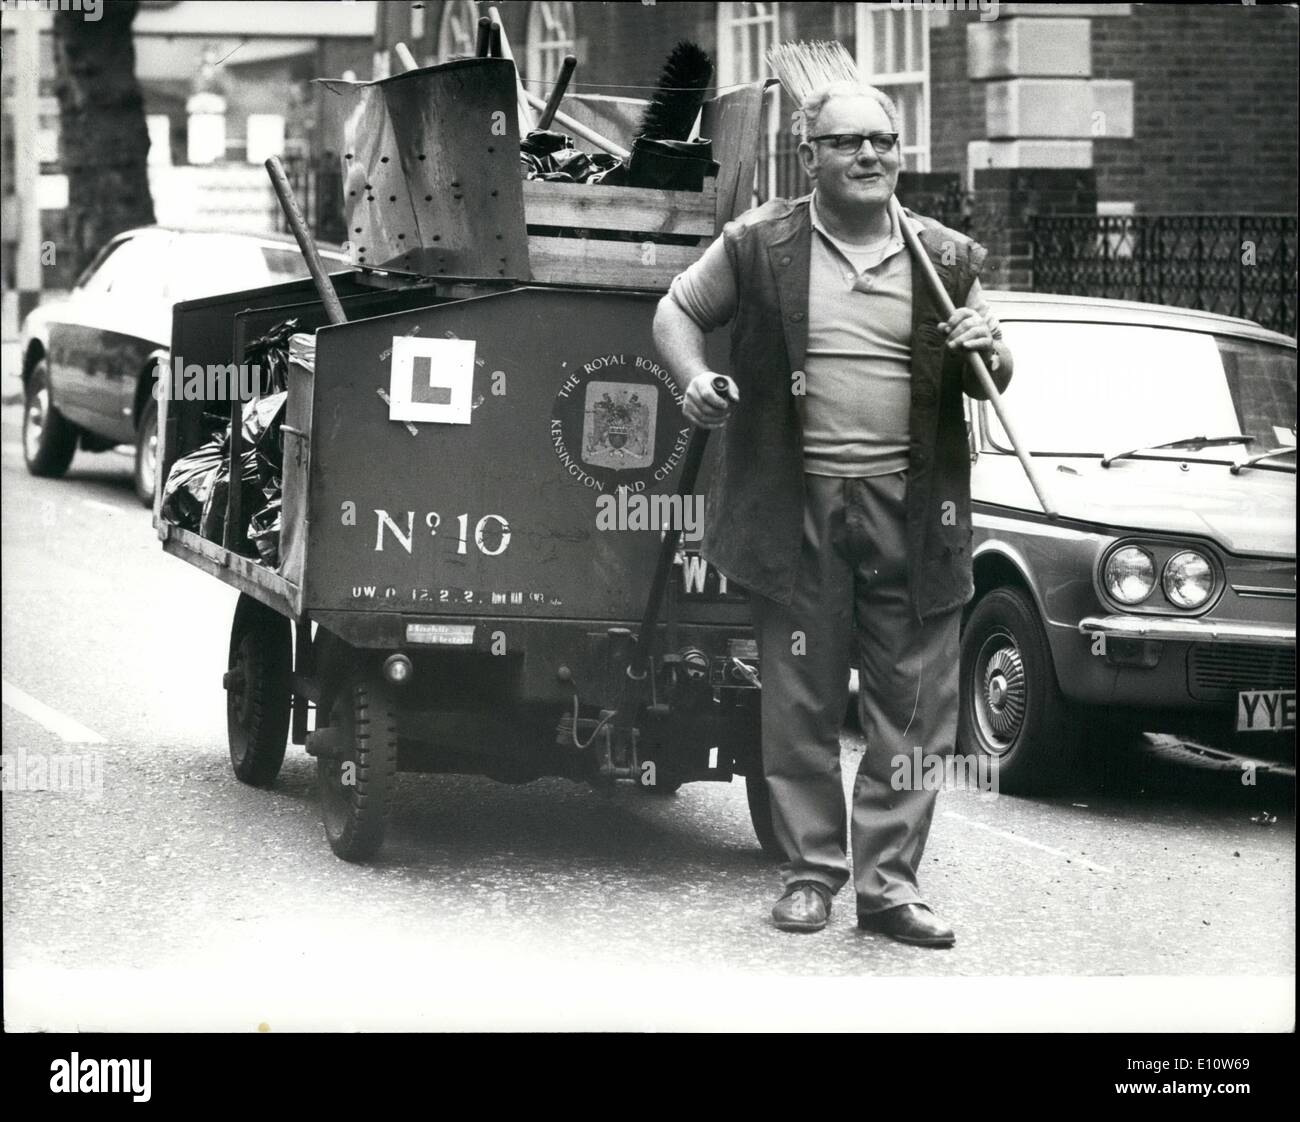 Apr. 04, 1974 - ''L'' Plates for Dust Cart Driver: Road Sweeper Bernie Heim pictures with his Dust Cart in London this morning displaying his 'L Plates' Bernie has net yet passed his test to drive the cart without a full Licence and and his depet they have net the time to take him for a test, so he carries on keeping London(sreads clean as a Learner driver. Stock Photo